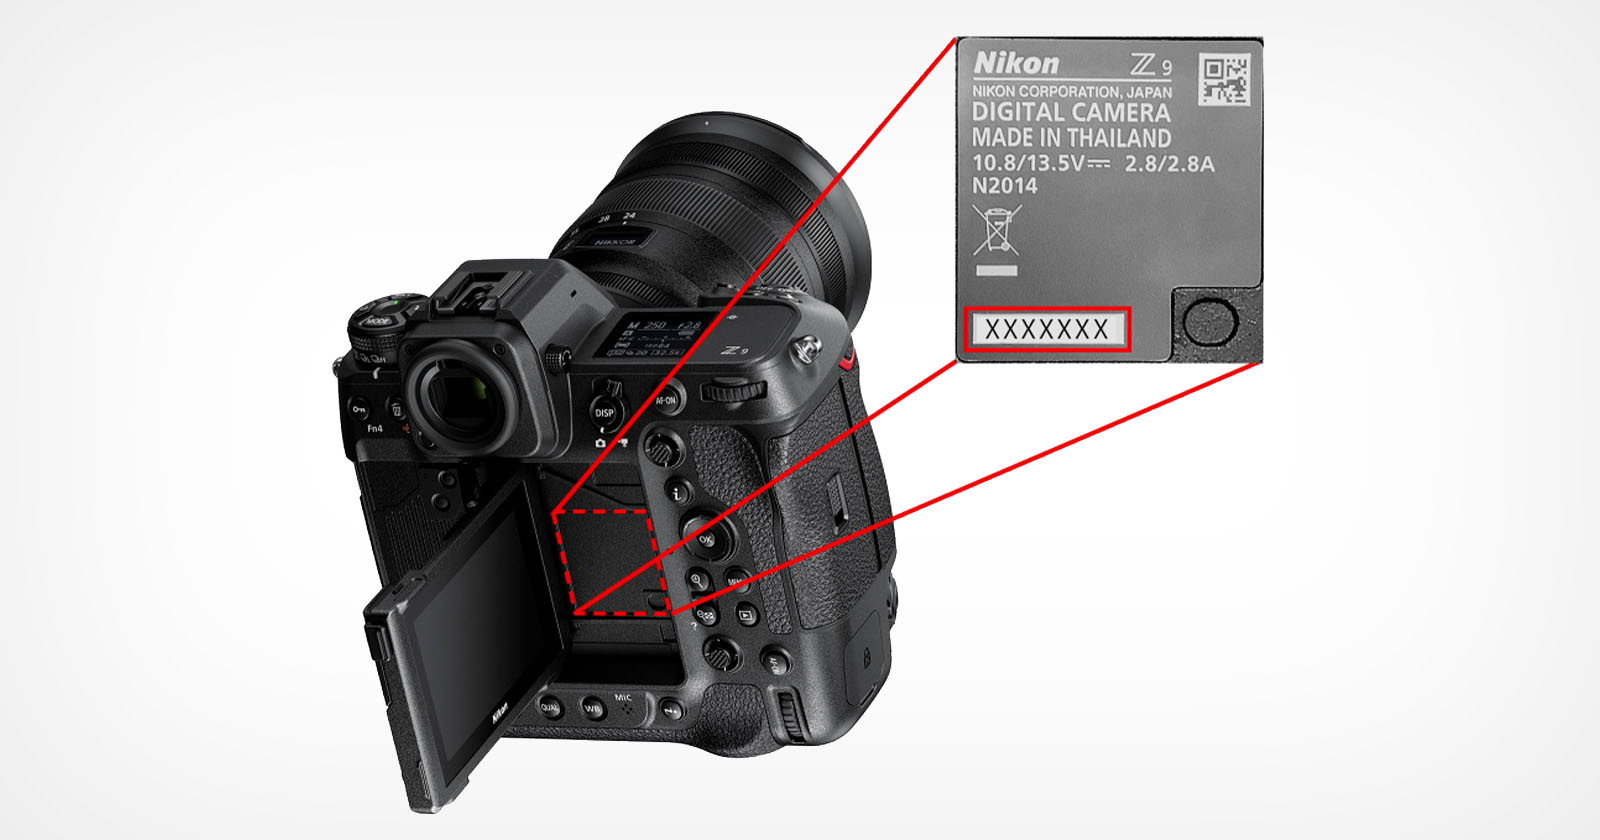  nikon service advisory some lens release buttons are 